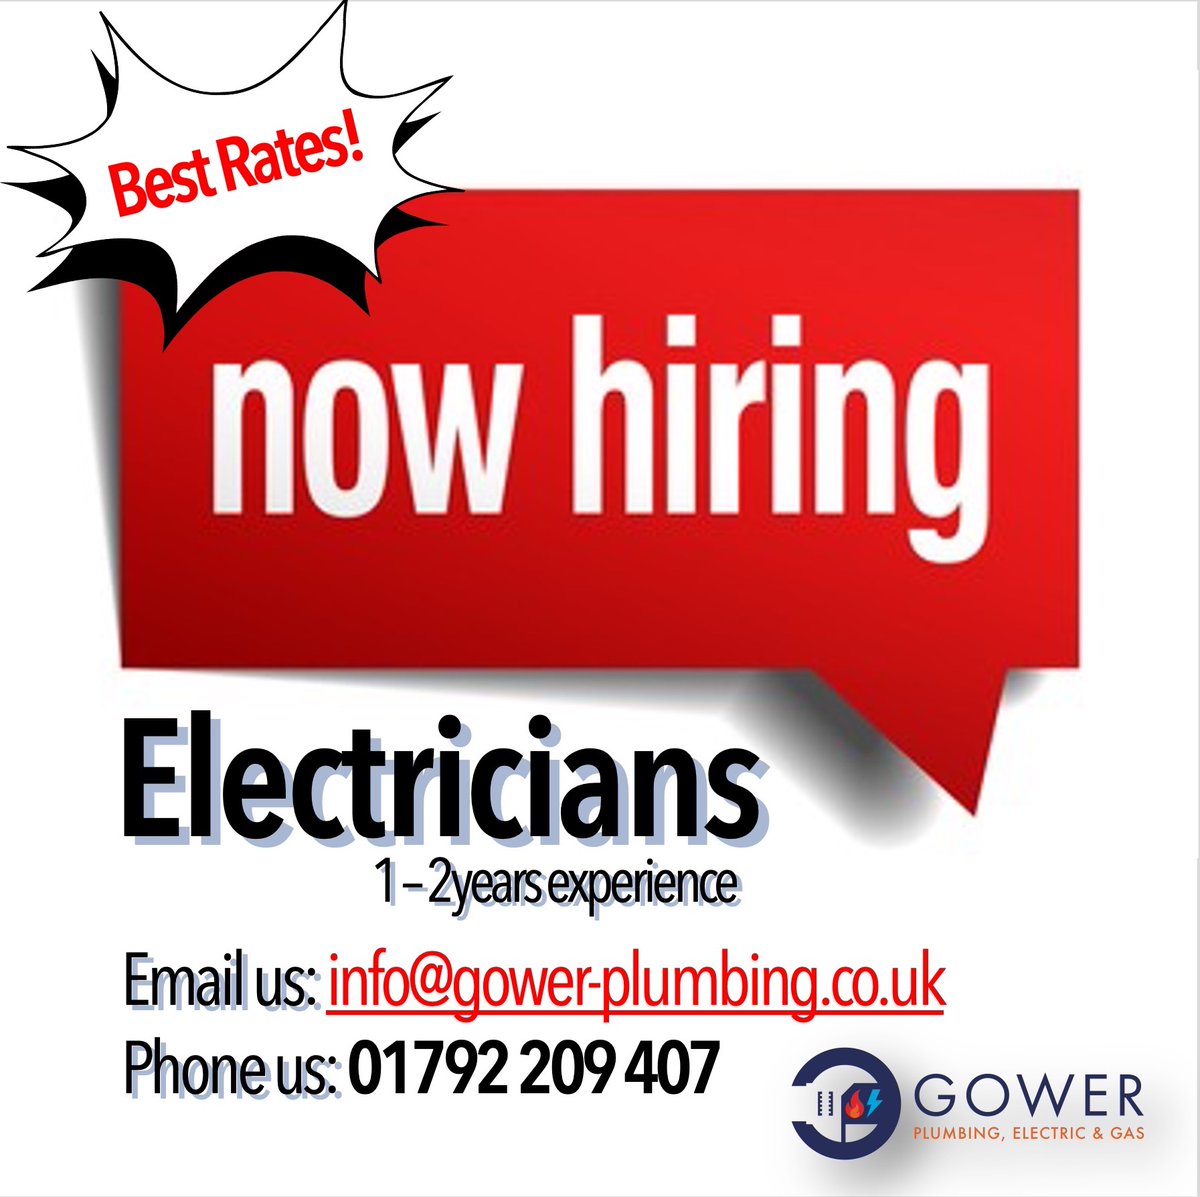 CALLING ALL Electricians.. Join the best local Family Engineering team.
Contact us at info@gower-plumbing.co.uk or Phone: 01792 209407
#Swanseajobs #Walesjobs #recuitment #bestcompany #electriciannearme #swanseaelectrician #electrician #swansea #southwales #walesonline